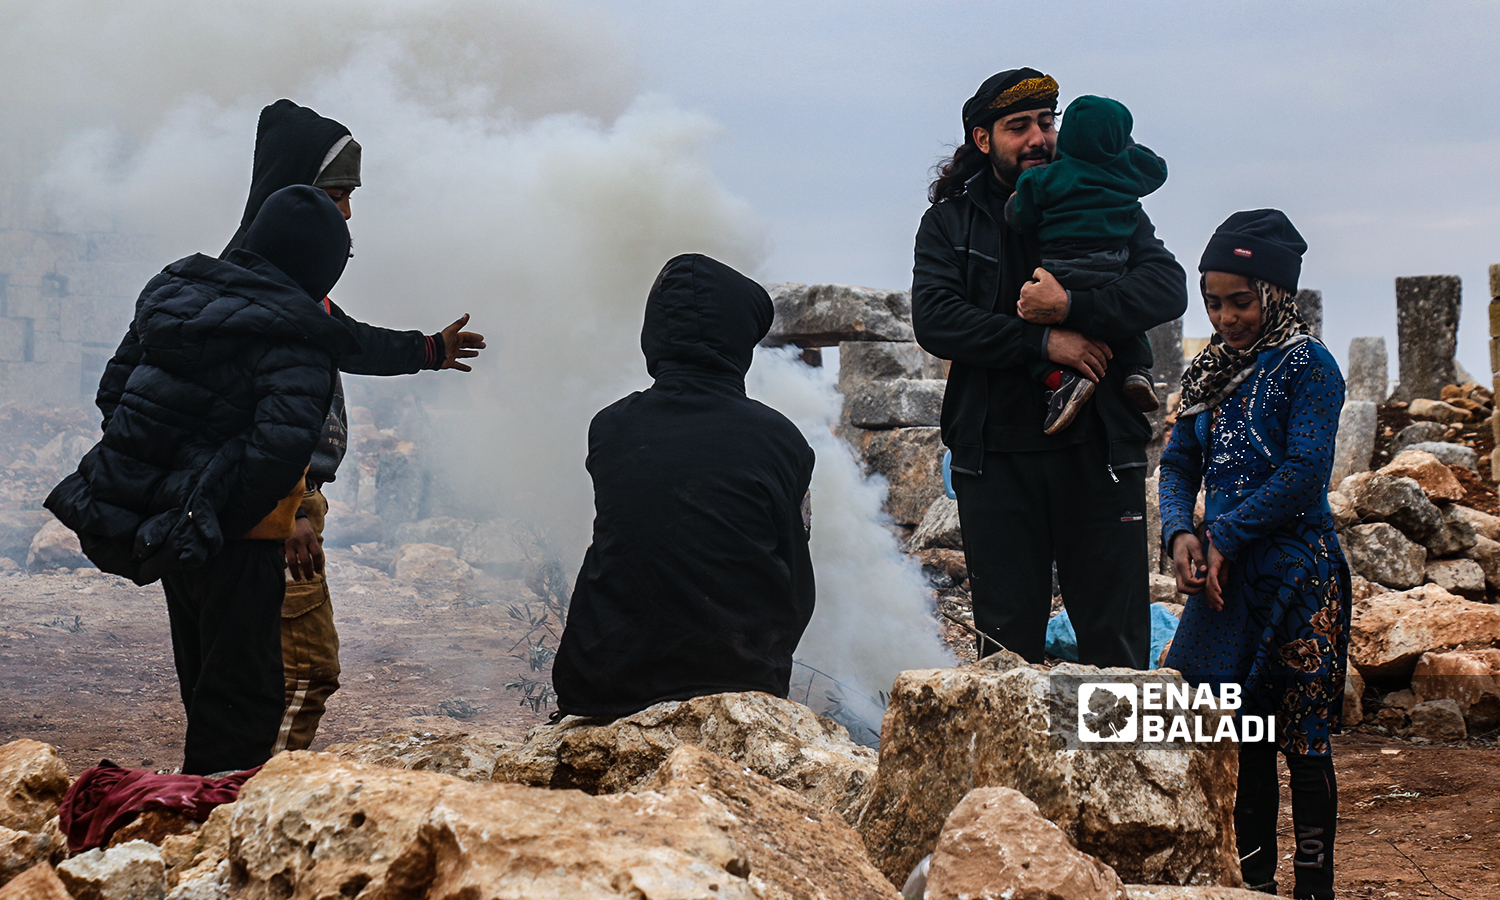 Displaced Syrians starting a fire for heating in the ancient Sarjableh area in the northern countryside of Idlib governorate - 22 January 2022 (Enab Baladi / Iyad Abdul Jawad)
